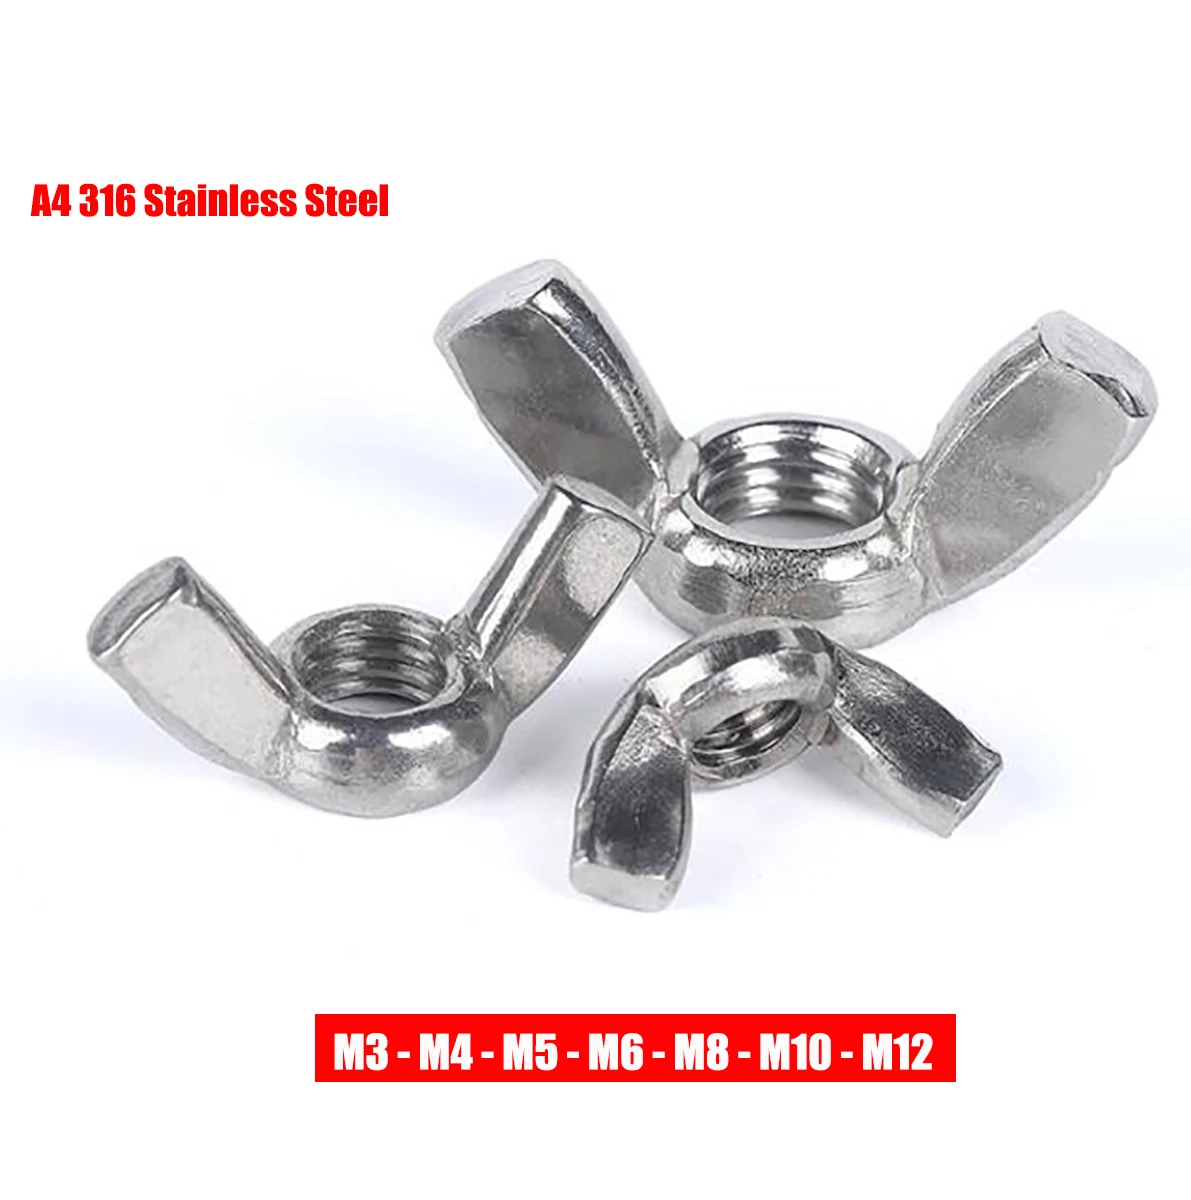 

A4 316 Stainless Steel Butterfly Wing Nuts M3 M4 M5 M6 M8 M10 M12 DIN315 Wingnut Hand Tighten Nut Fit Screw Bolts